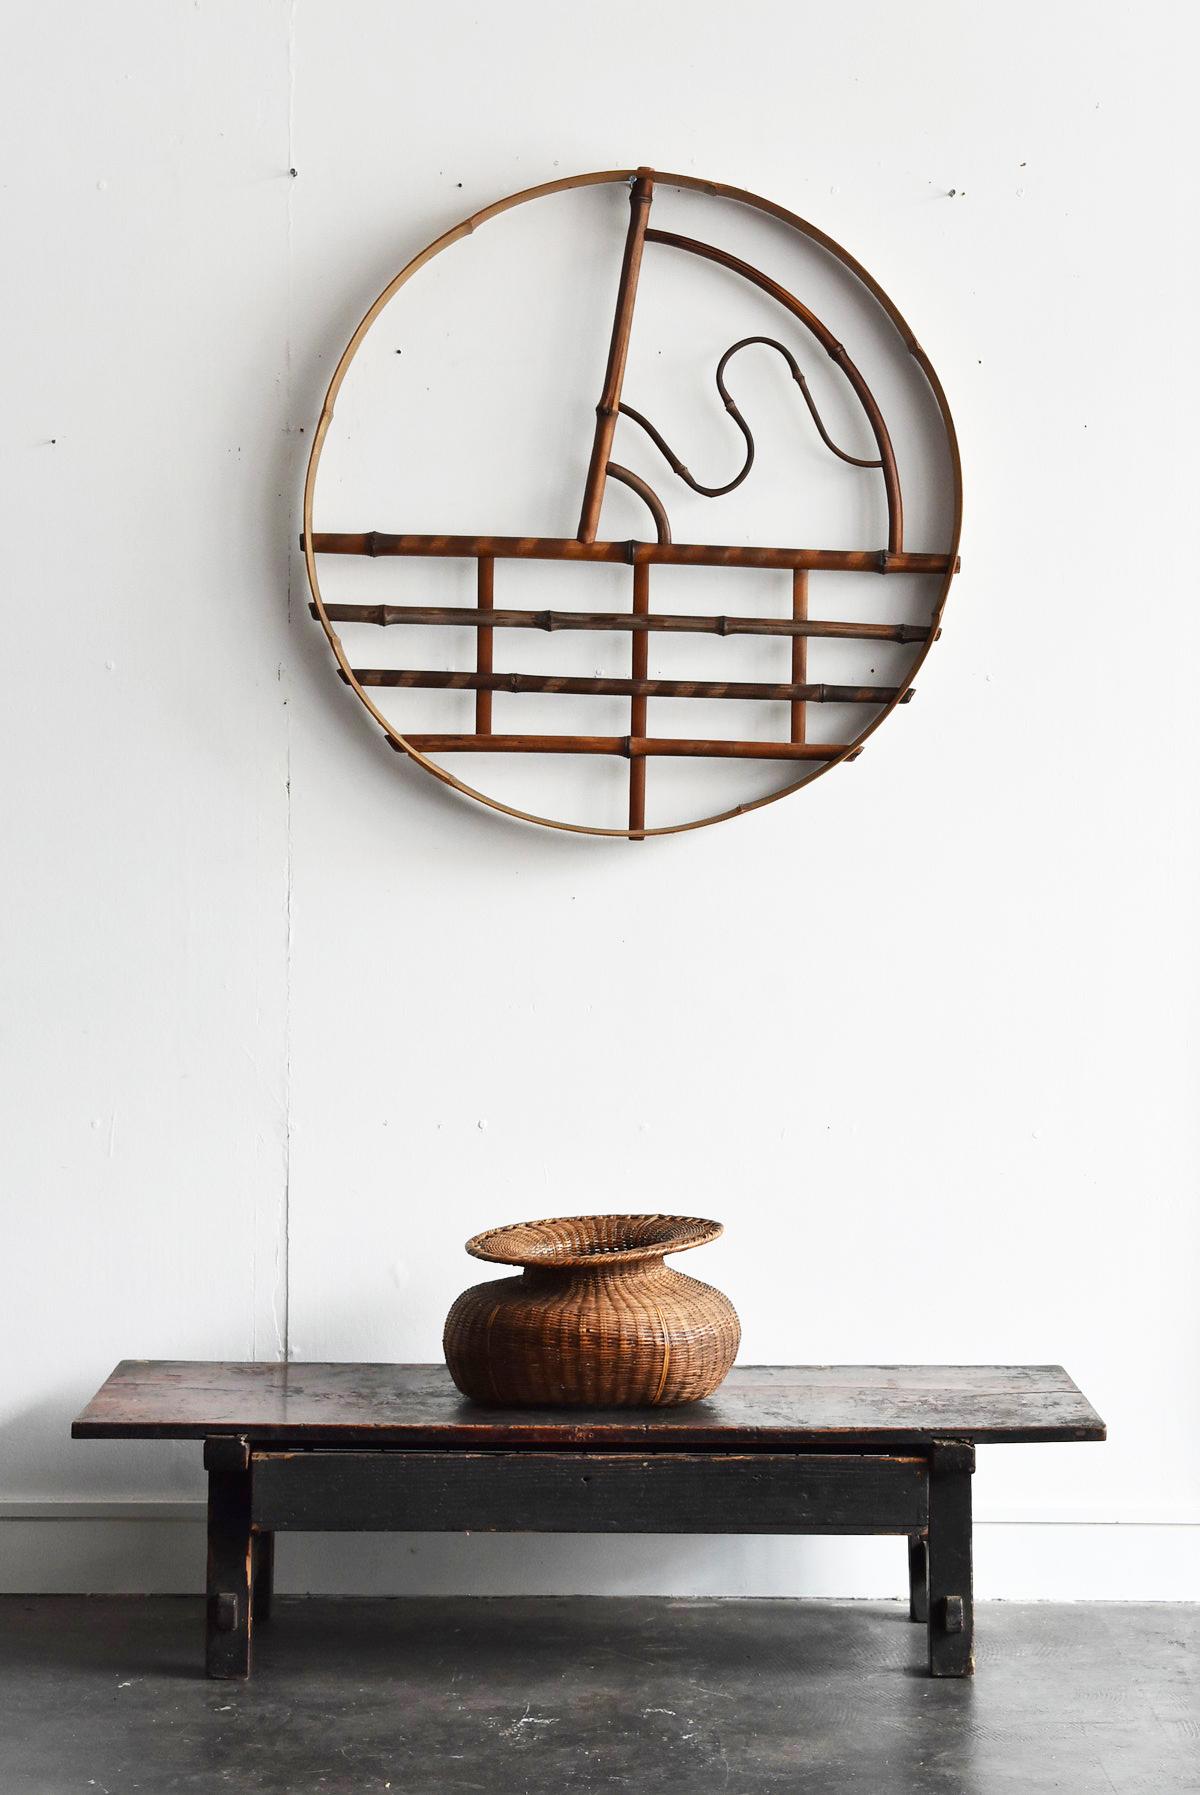 Bamboo wall decoration from the Taisho era to the Showa era in Japan.
I think it is one of the architectural decorations to fit into the walls of the room.

It's very beautiful and cool.
It is a design that can be harmonized with any indoor